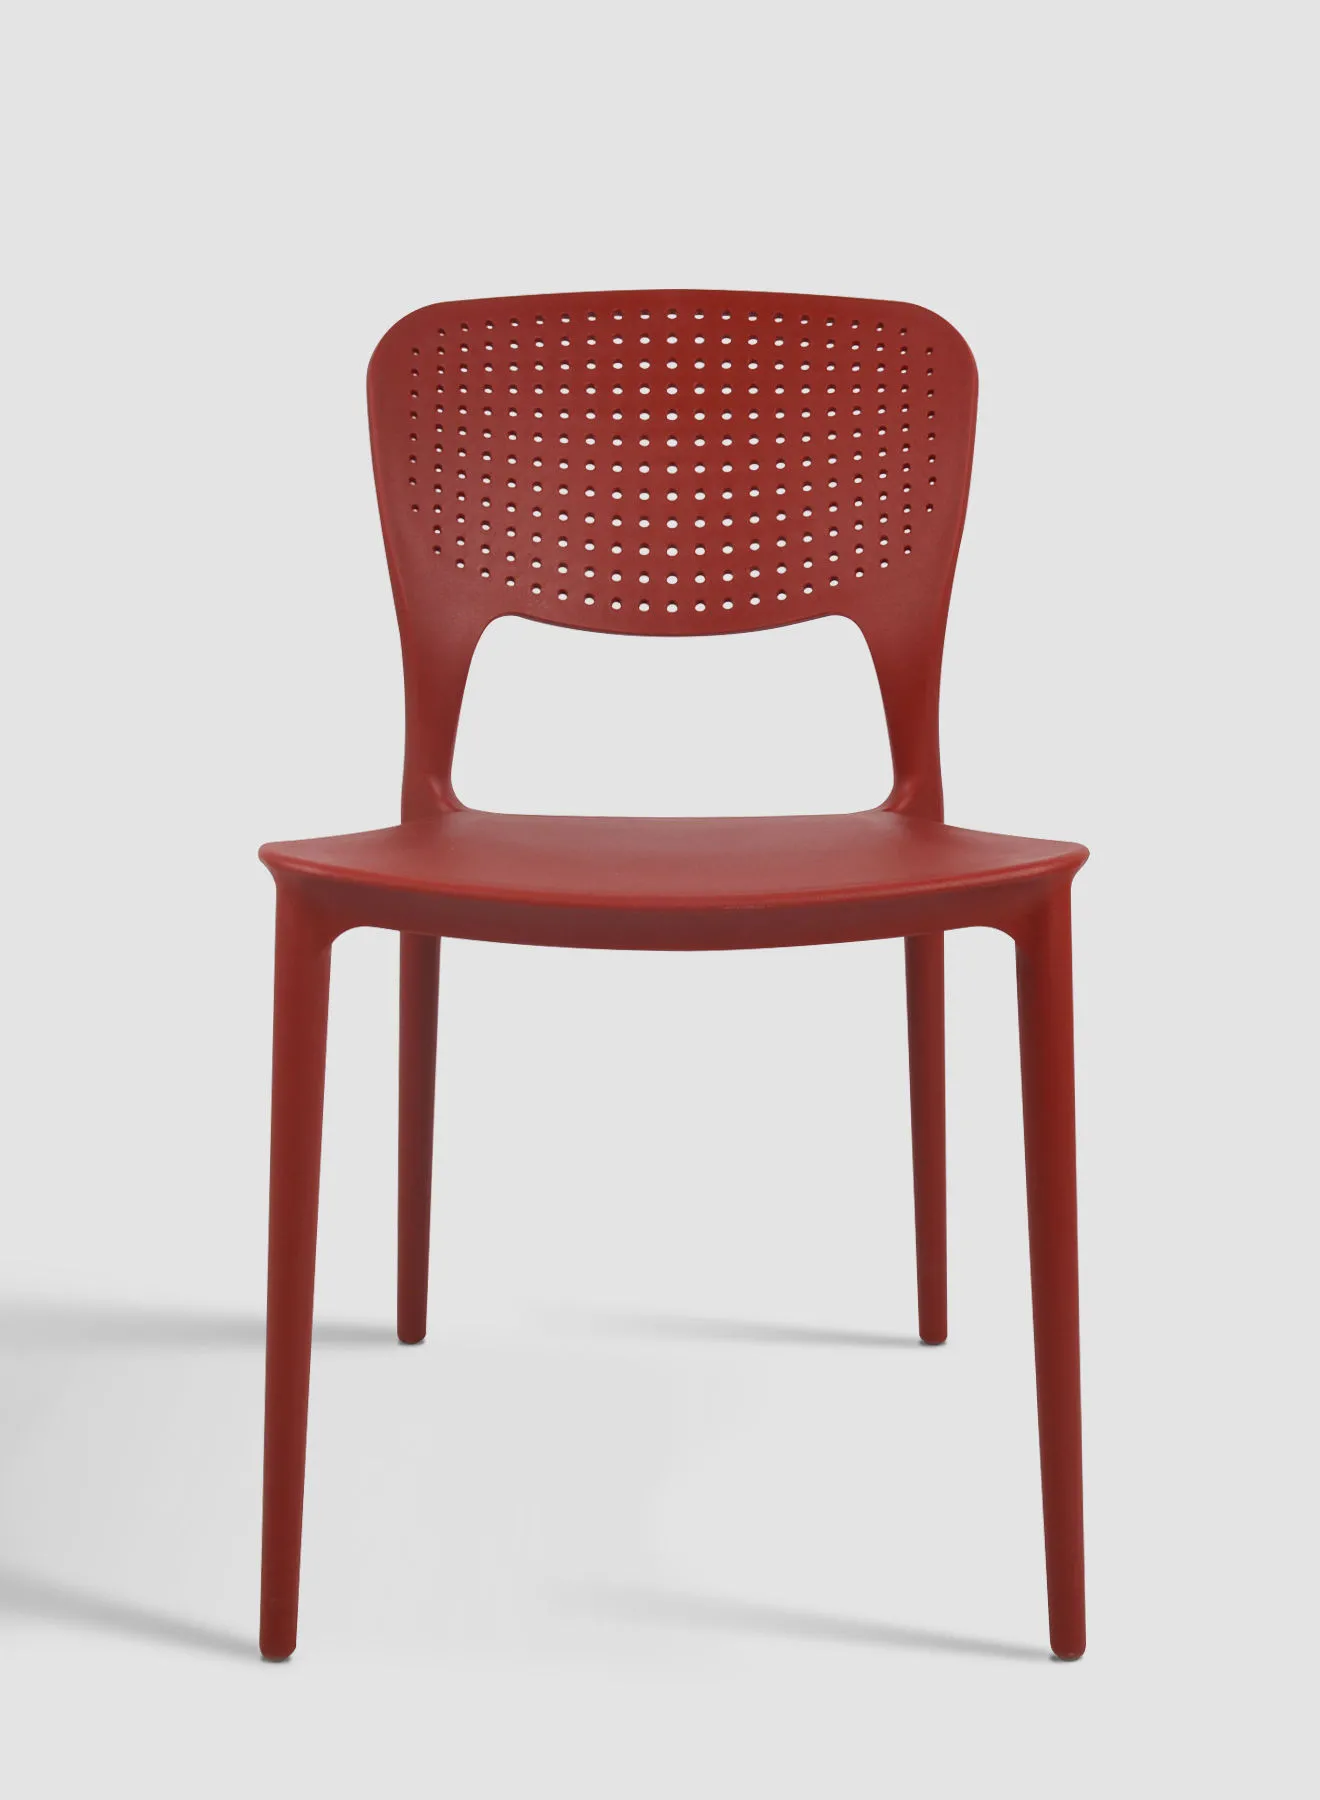 Switch Dining Chair In Dark Red Size 46 X 56 X 80cm - packed size 55.5 X 47 X 81cm